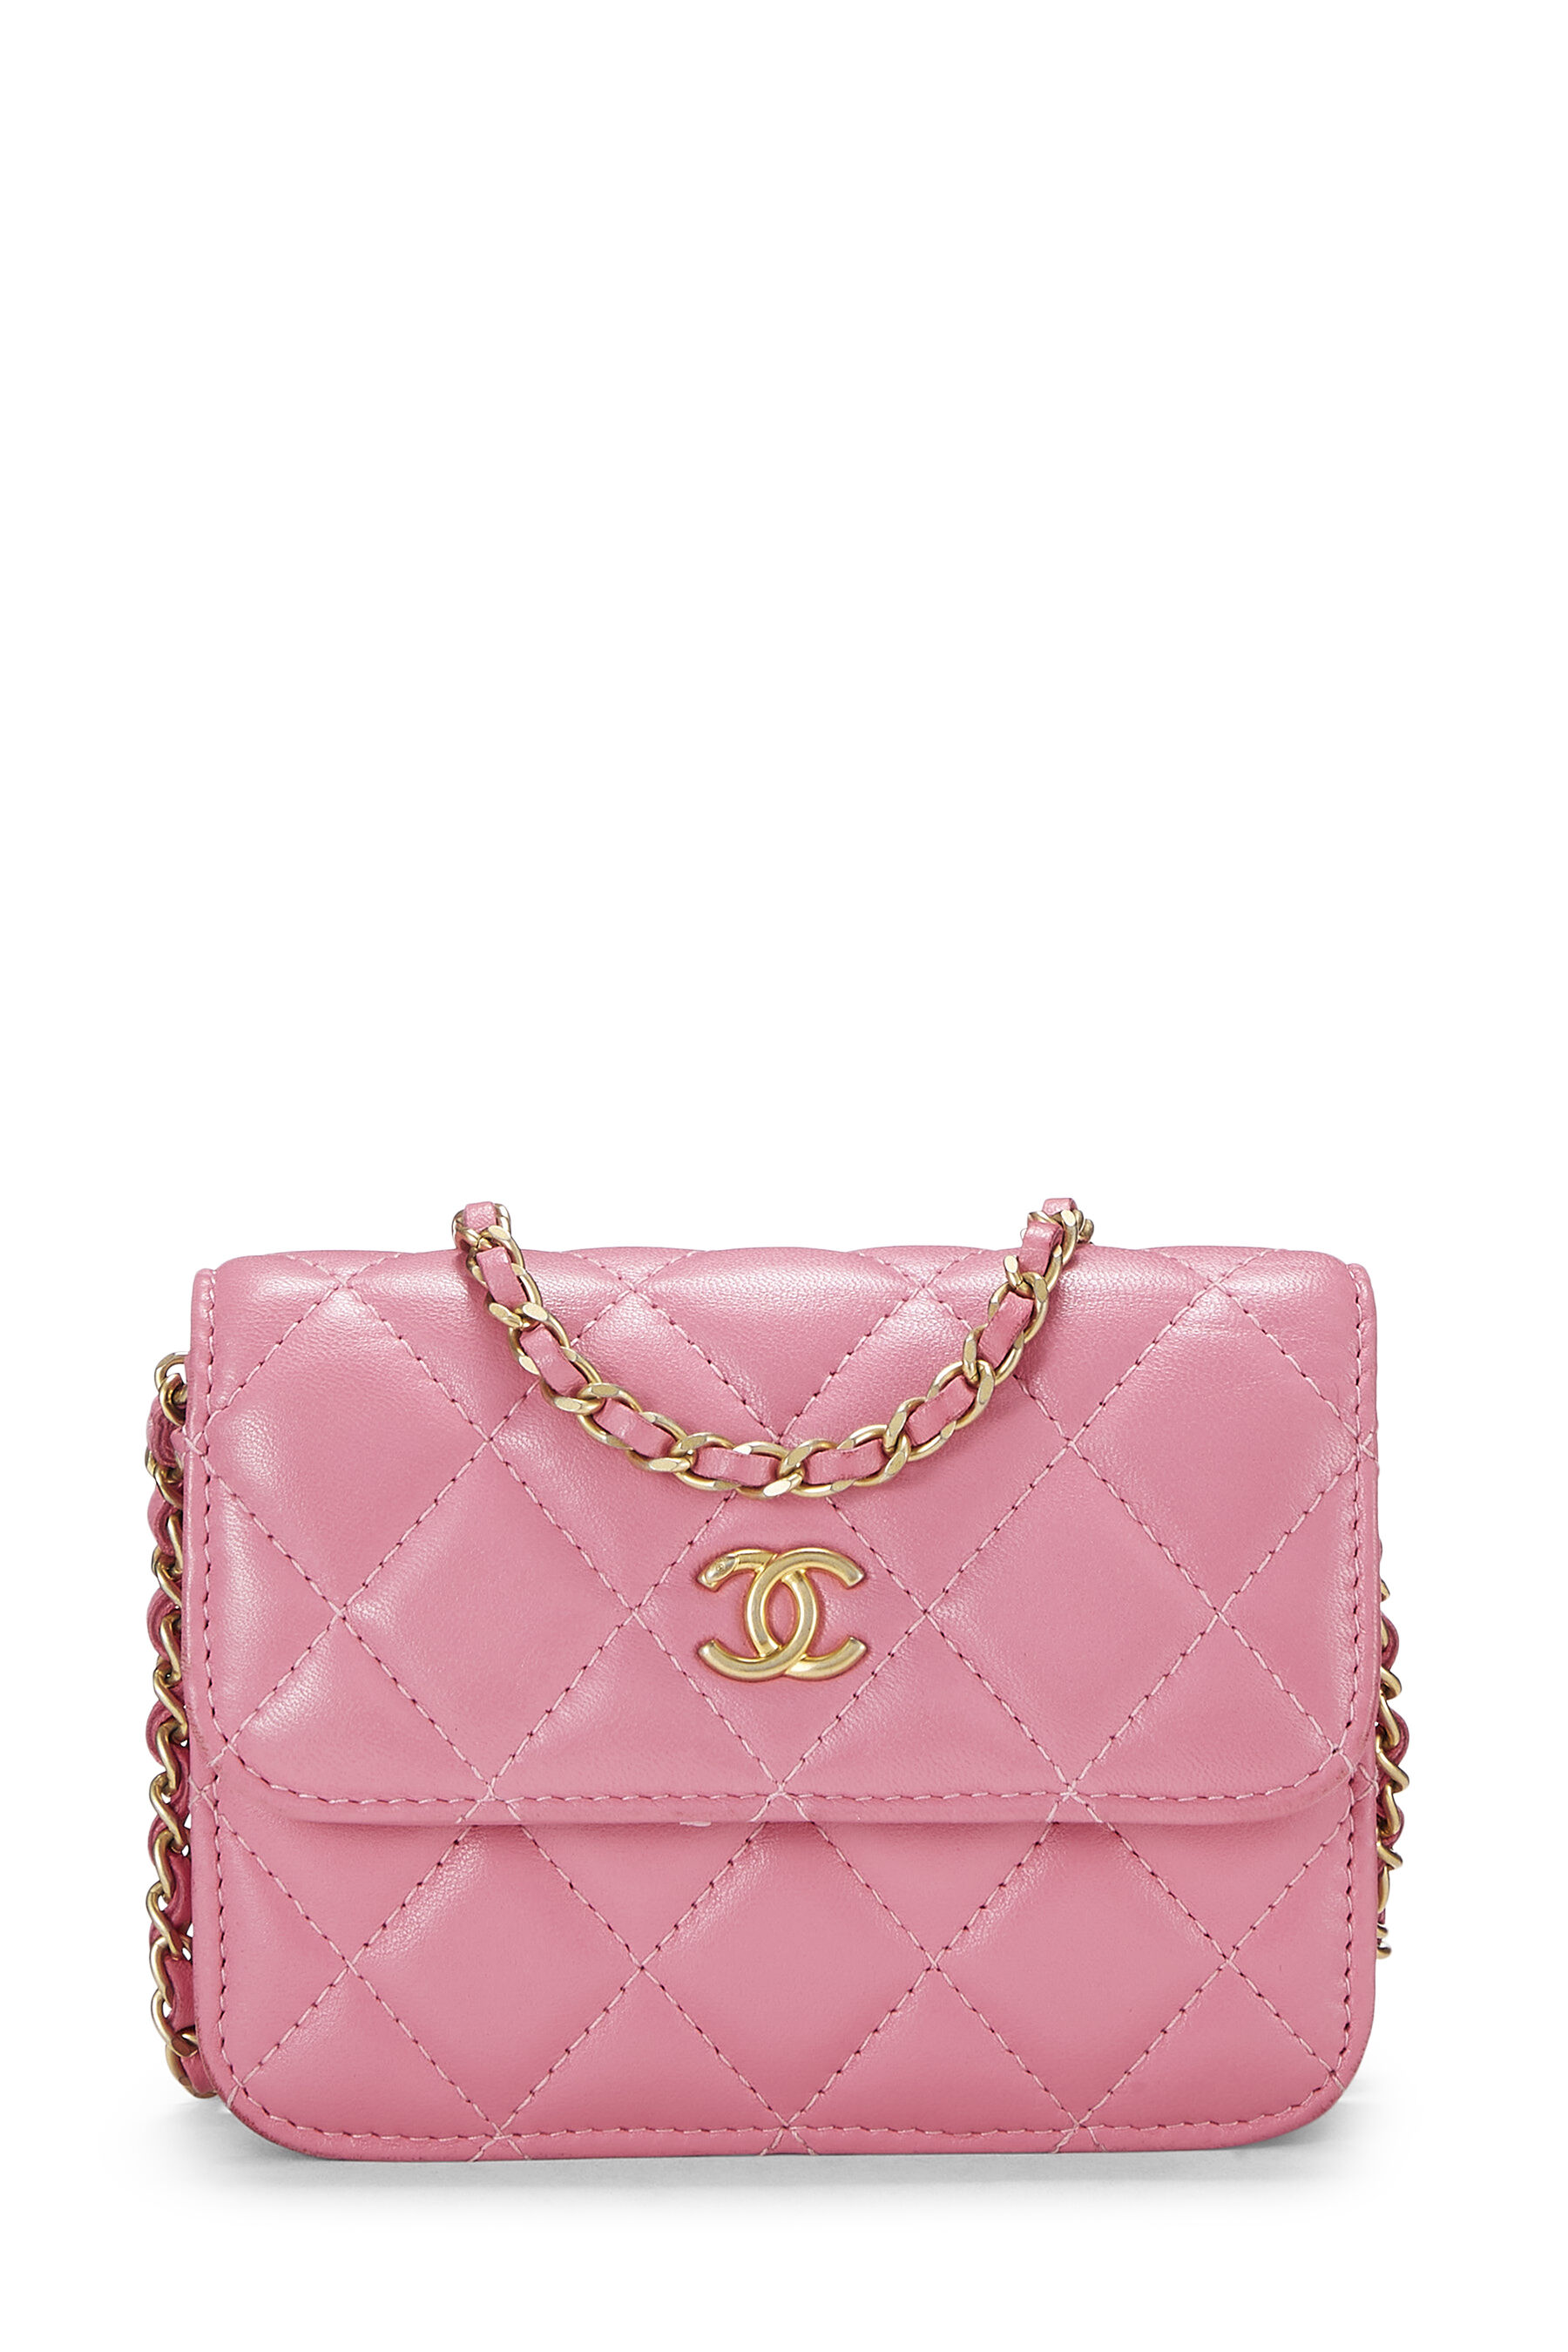 Chanel - Pink Quilted Lambskin Pearl Crush Chain Clutch